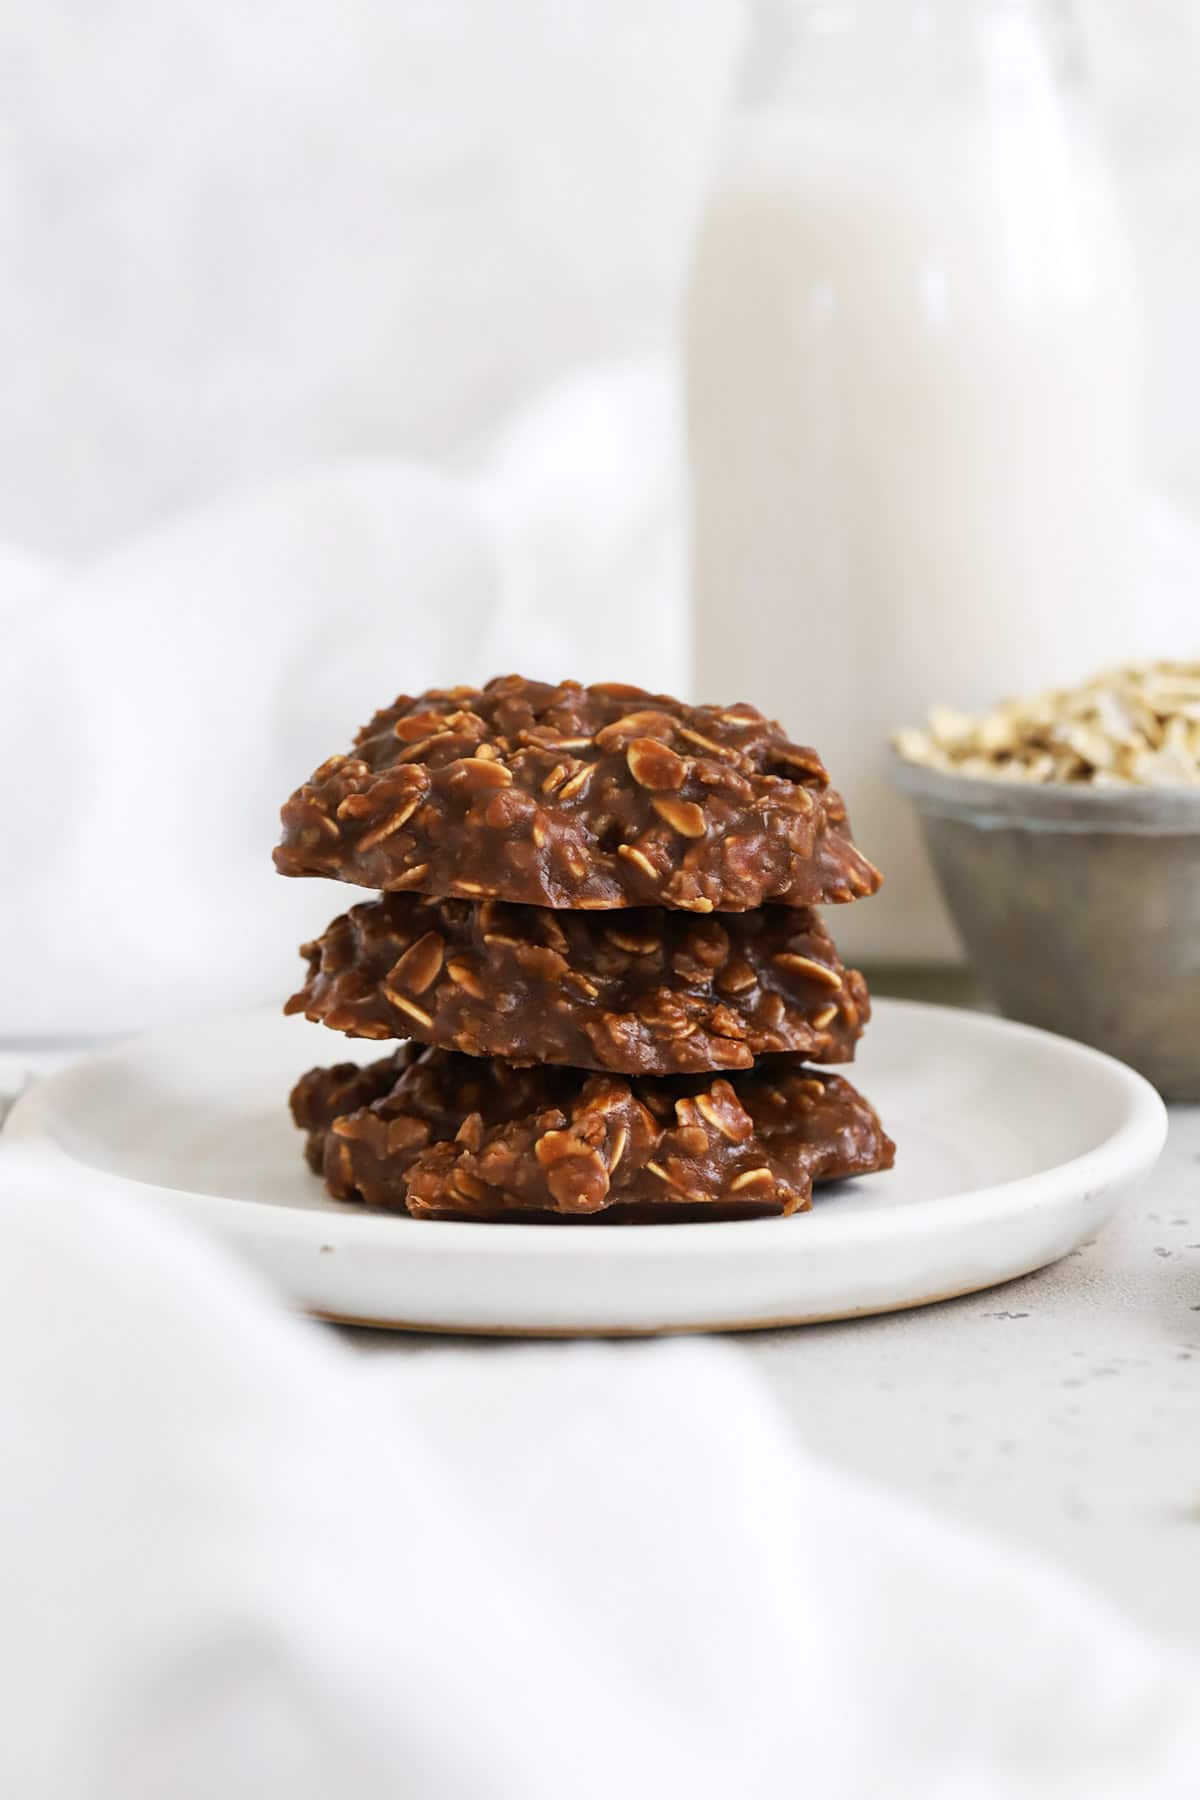 A stack of three gluten-free no-bake cookies on a white plate with a bottle of milk in the background